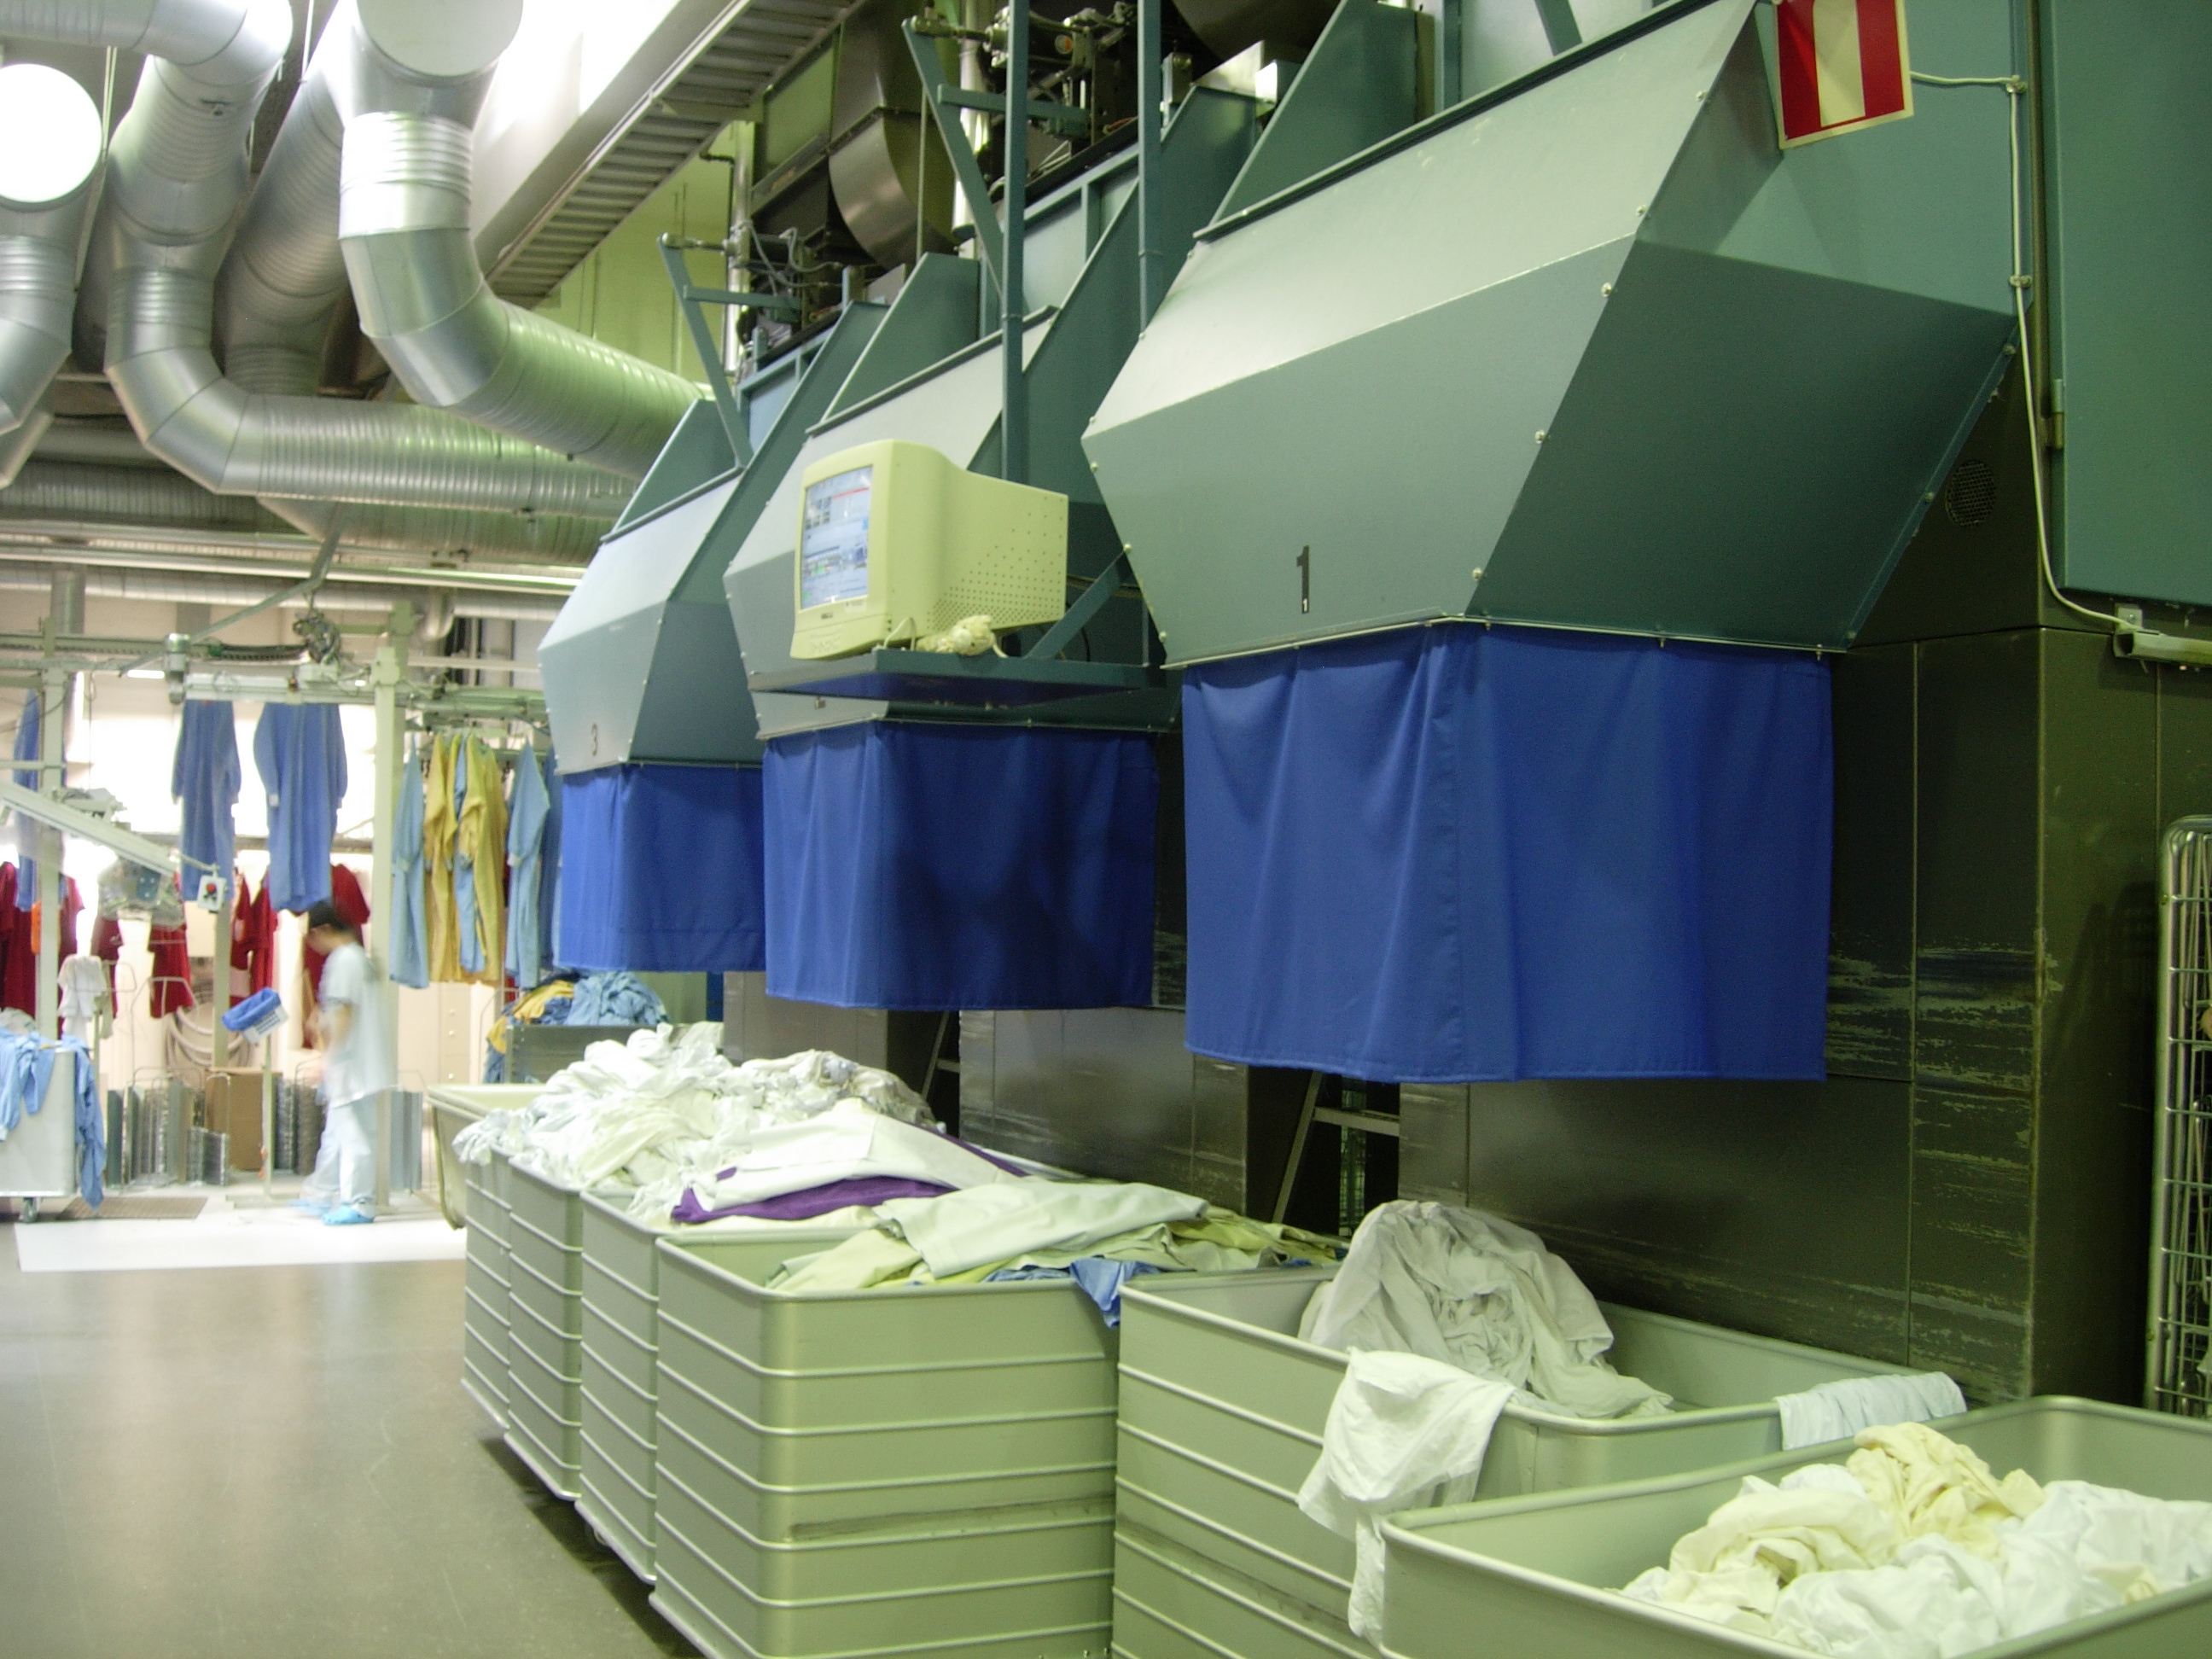 Commercial Laundry Equipment: Platform Scales Ease the Load